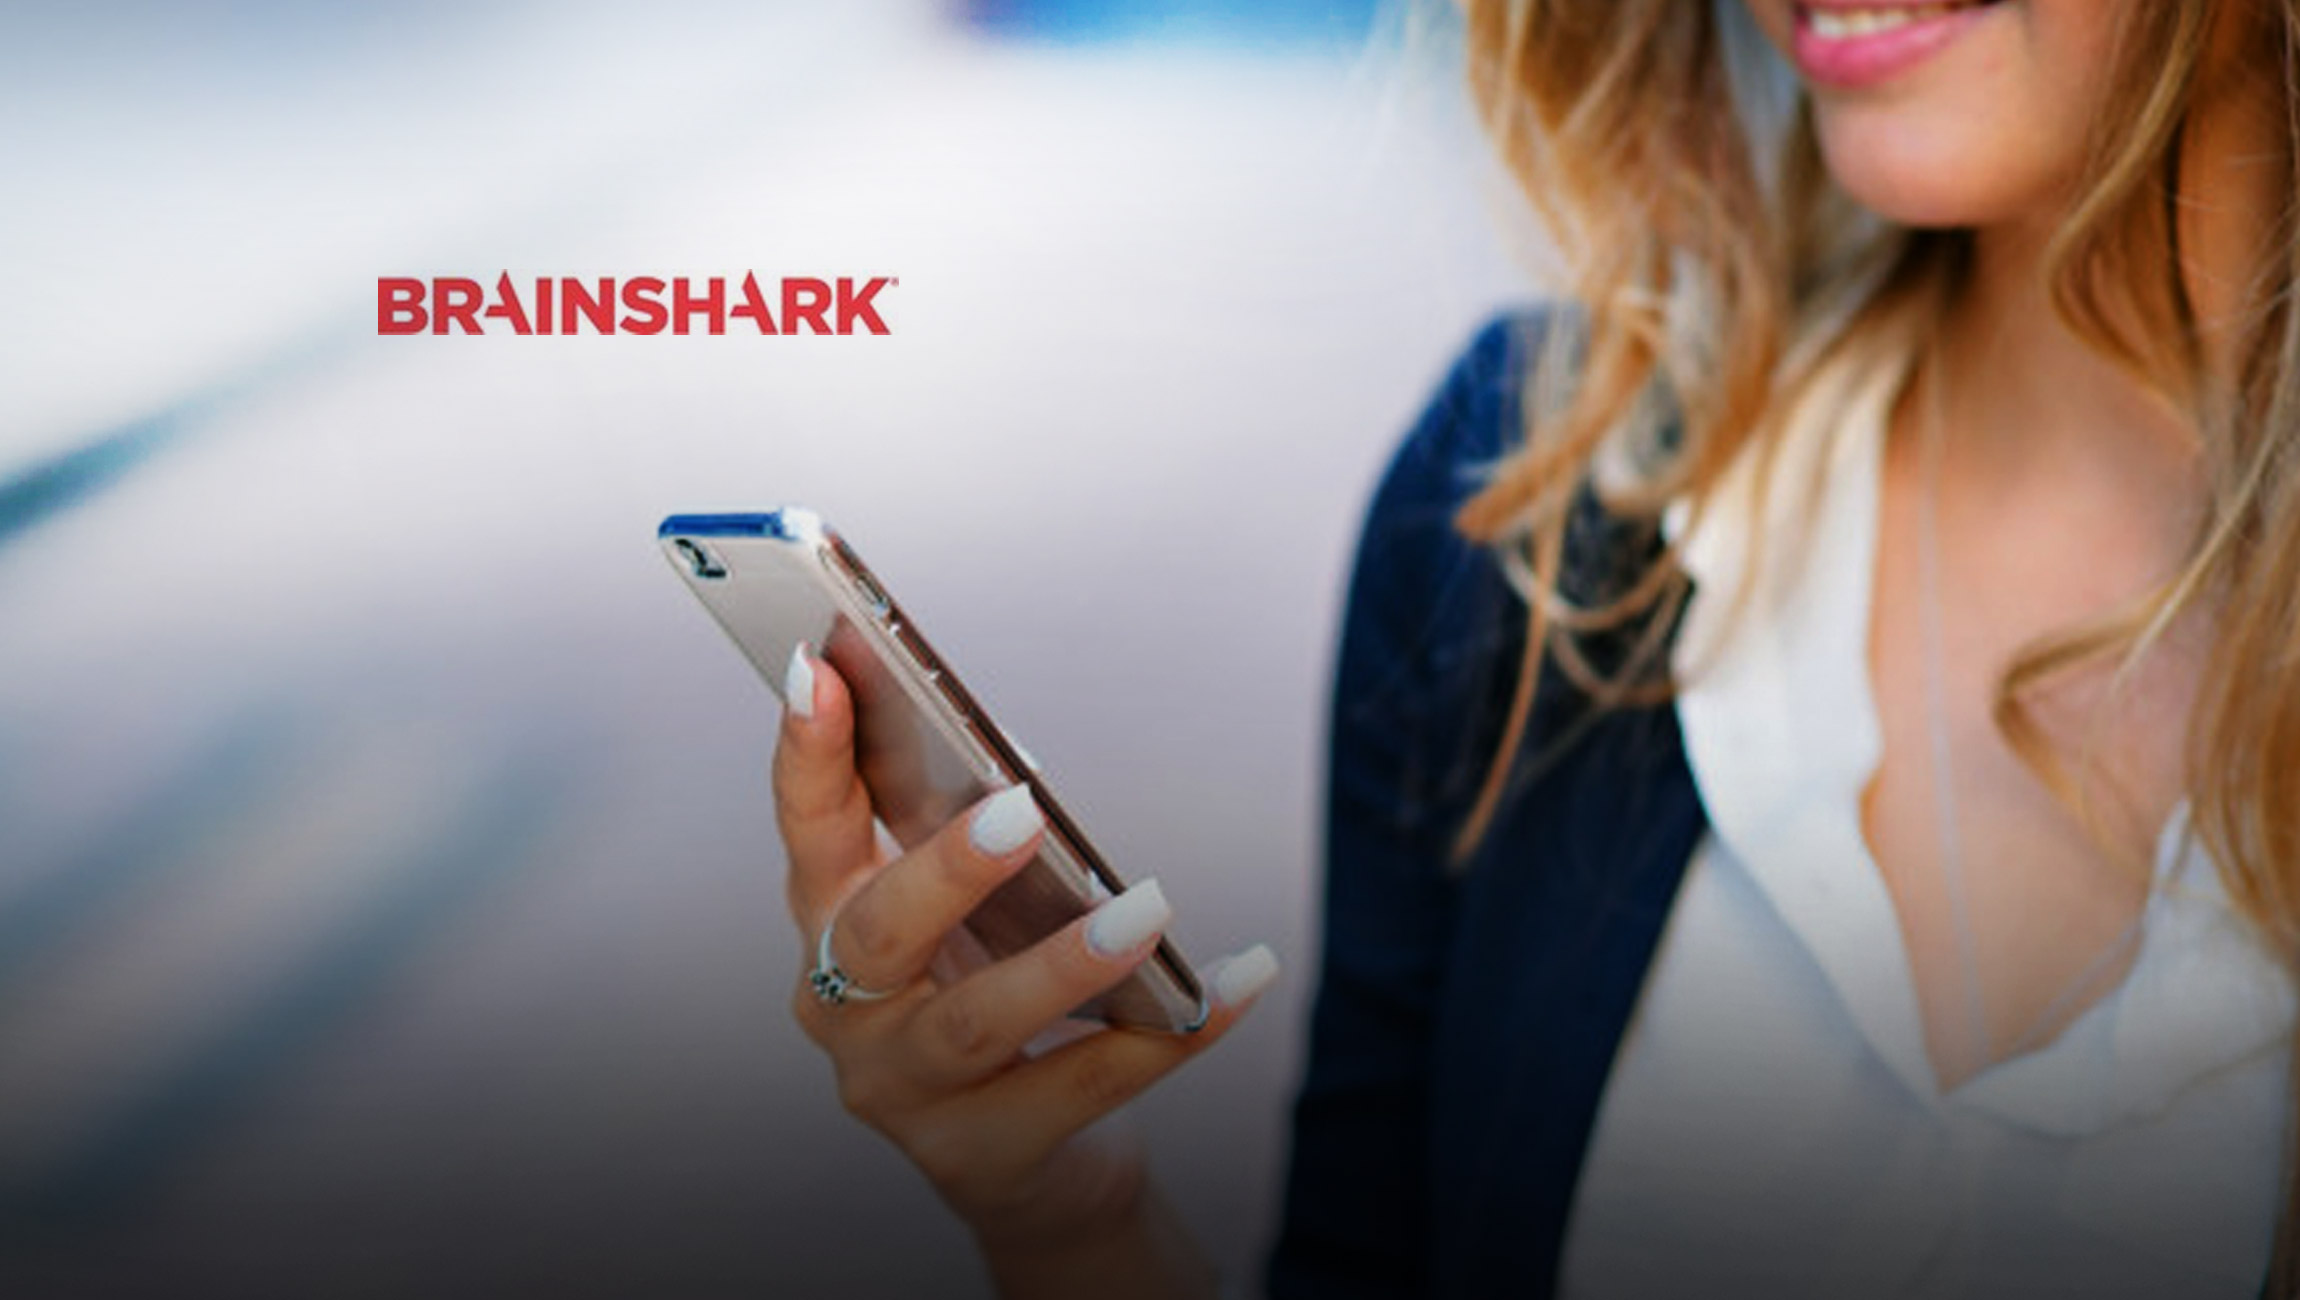 Brainshark Closes Q1 with 89% Increase in Net-New Customers